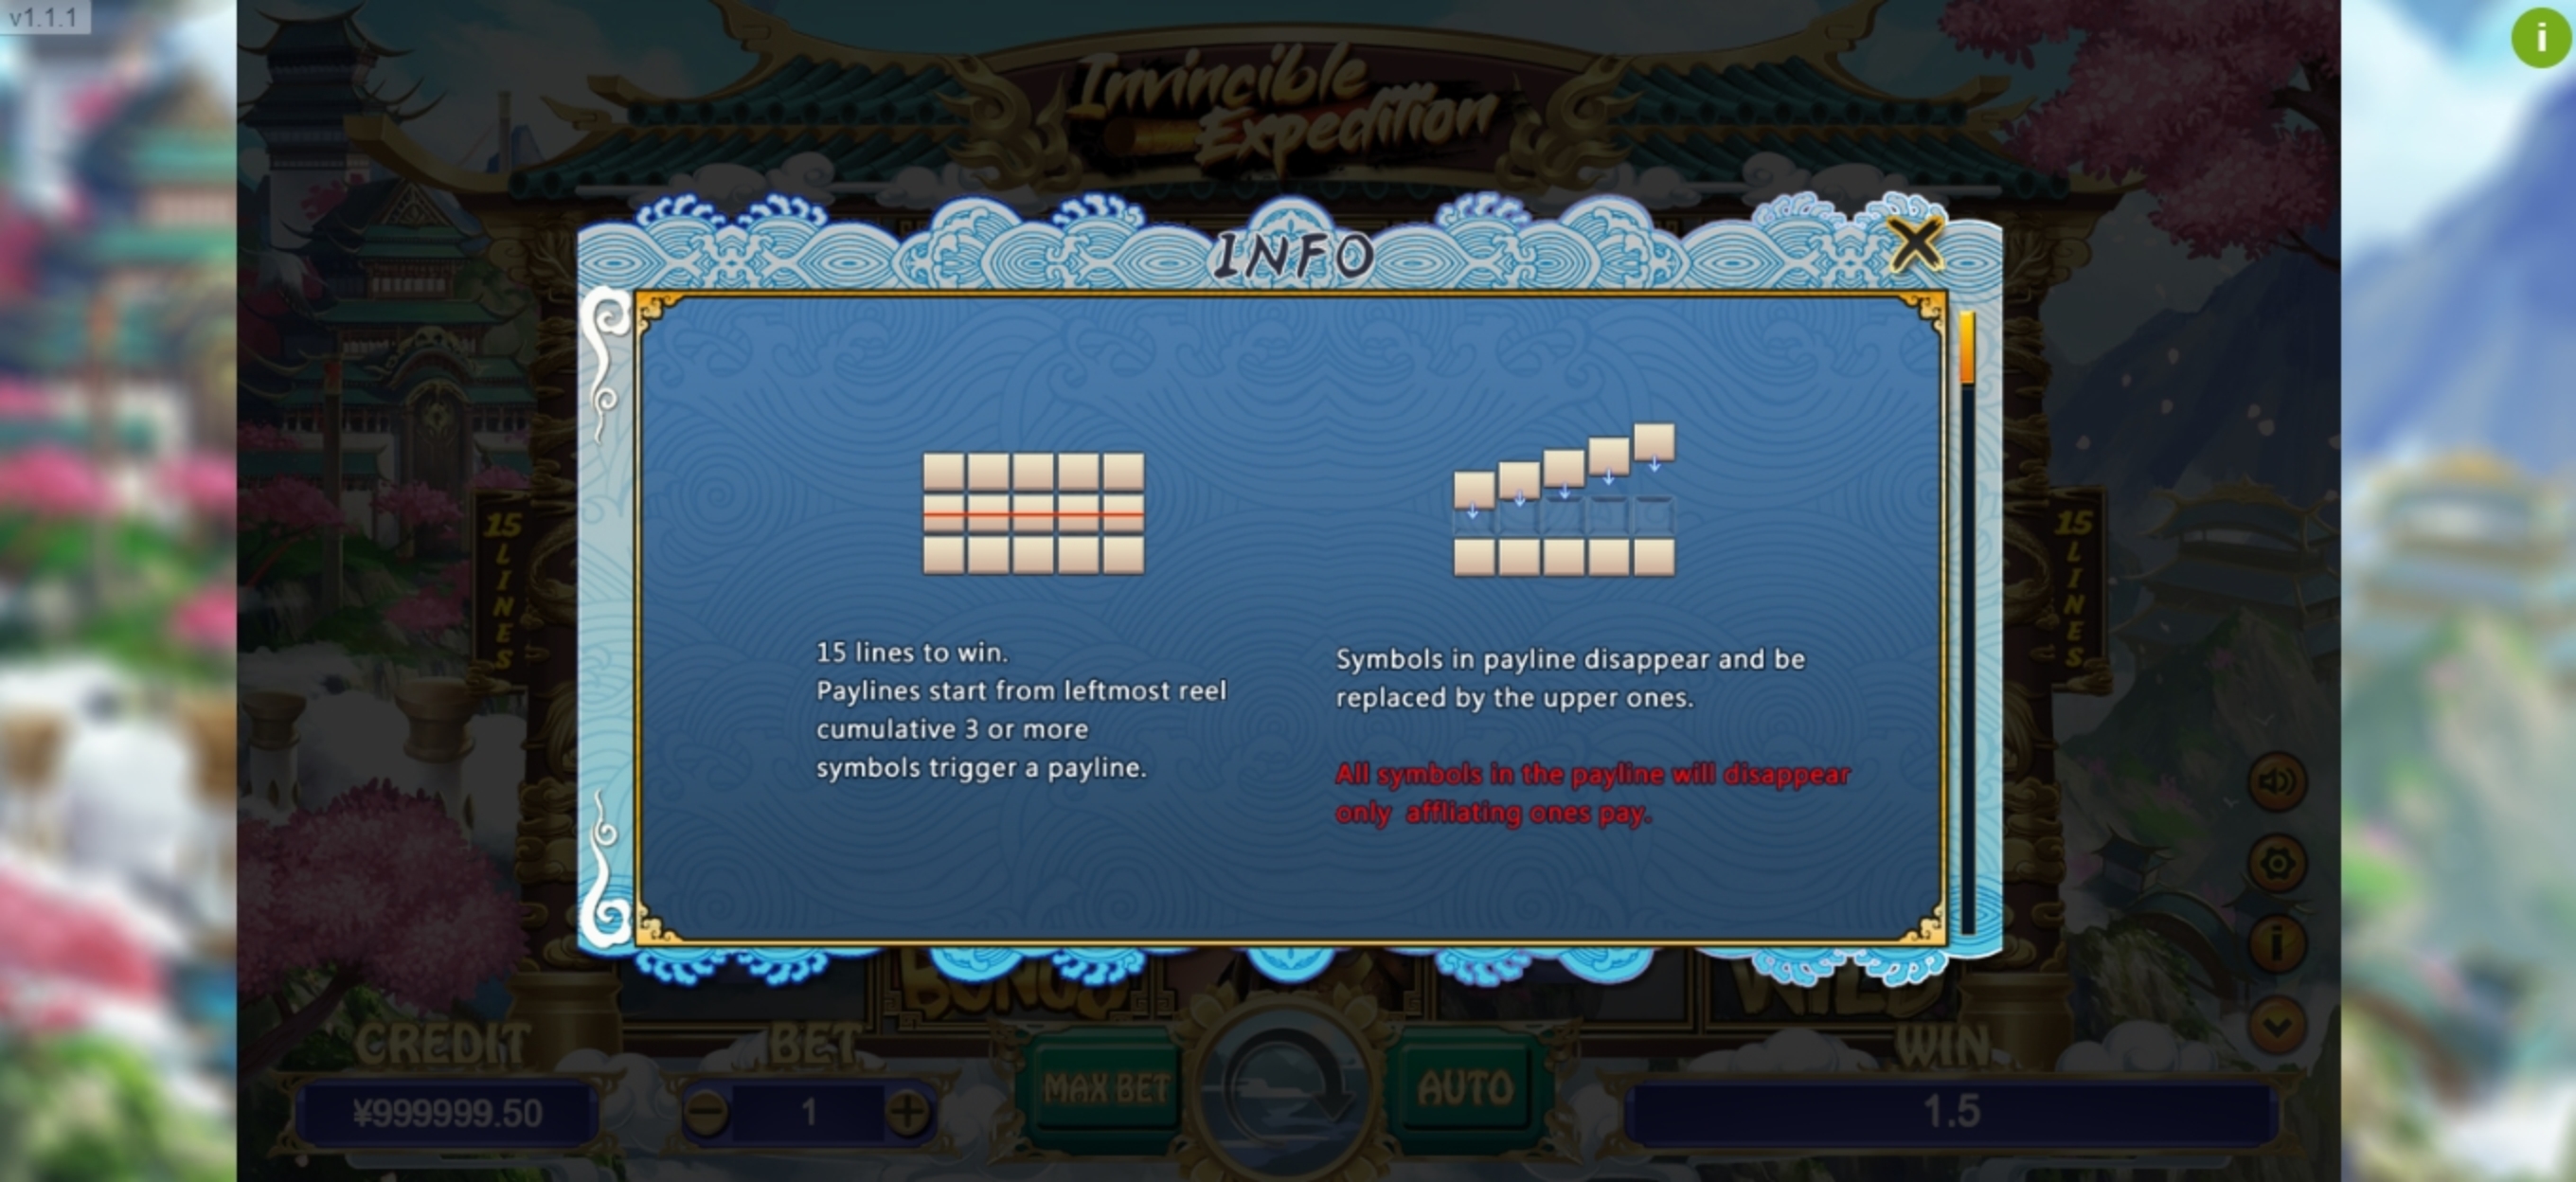 Info of Invincible Expedition Slot Game by TIDY